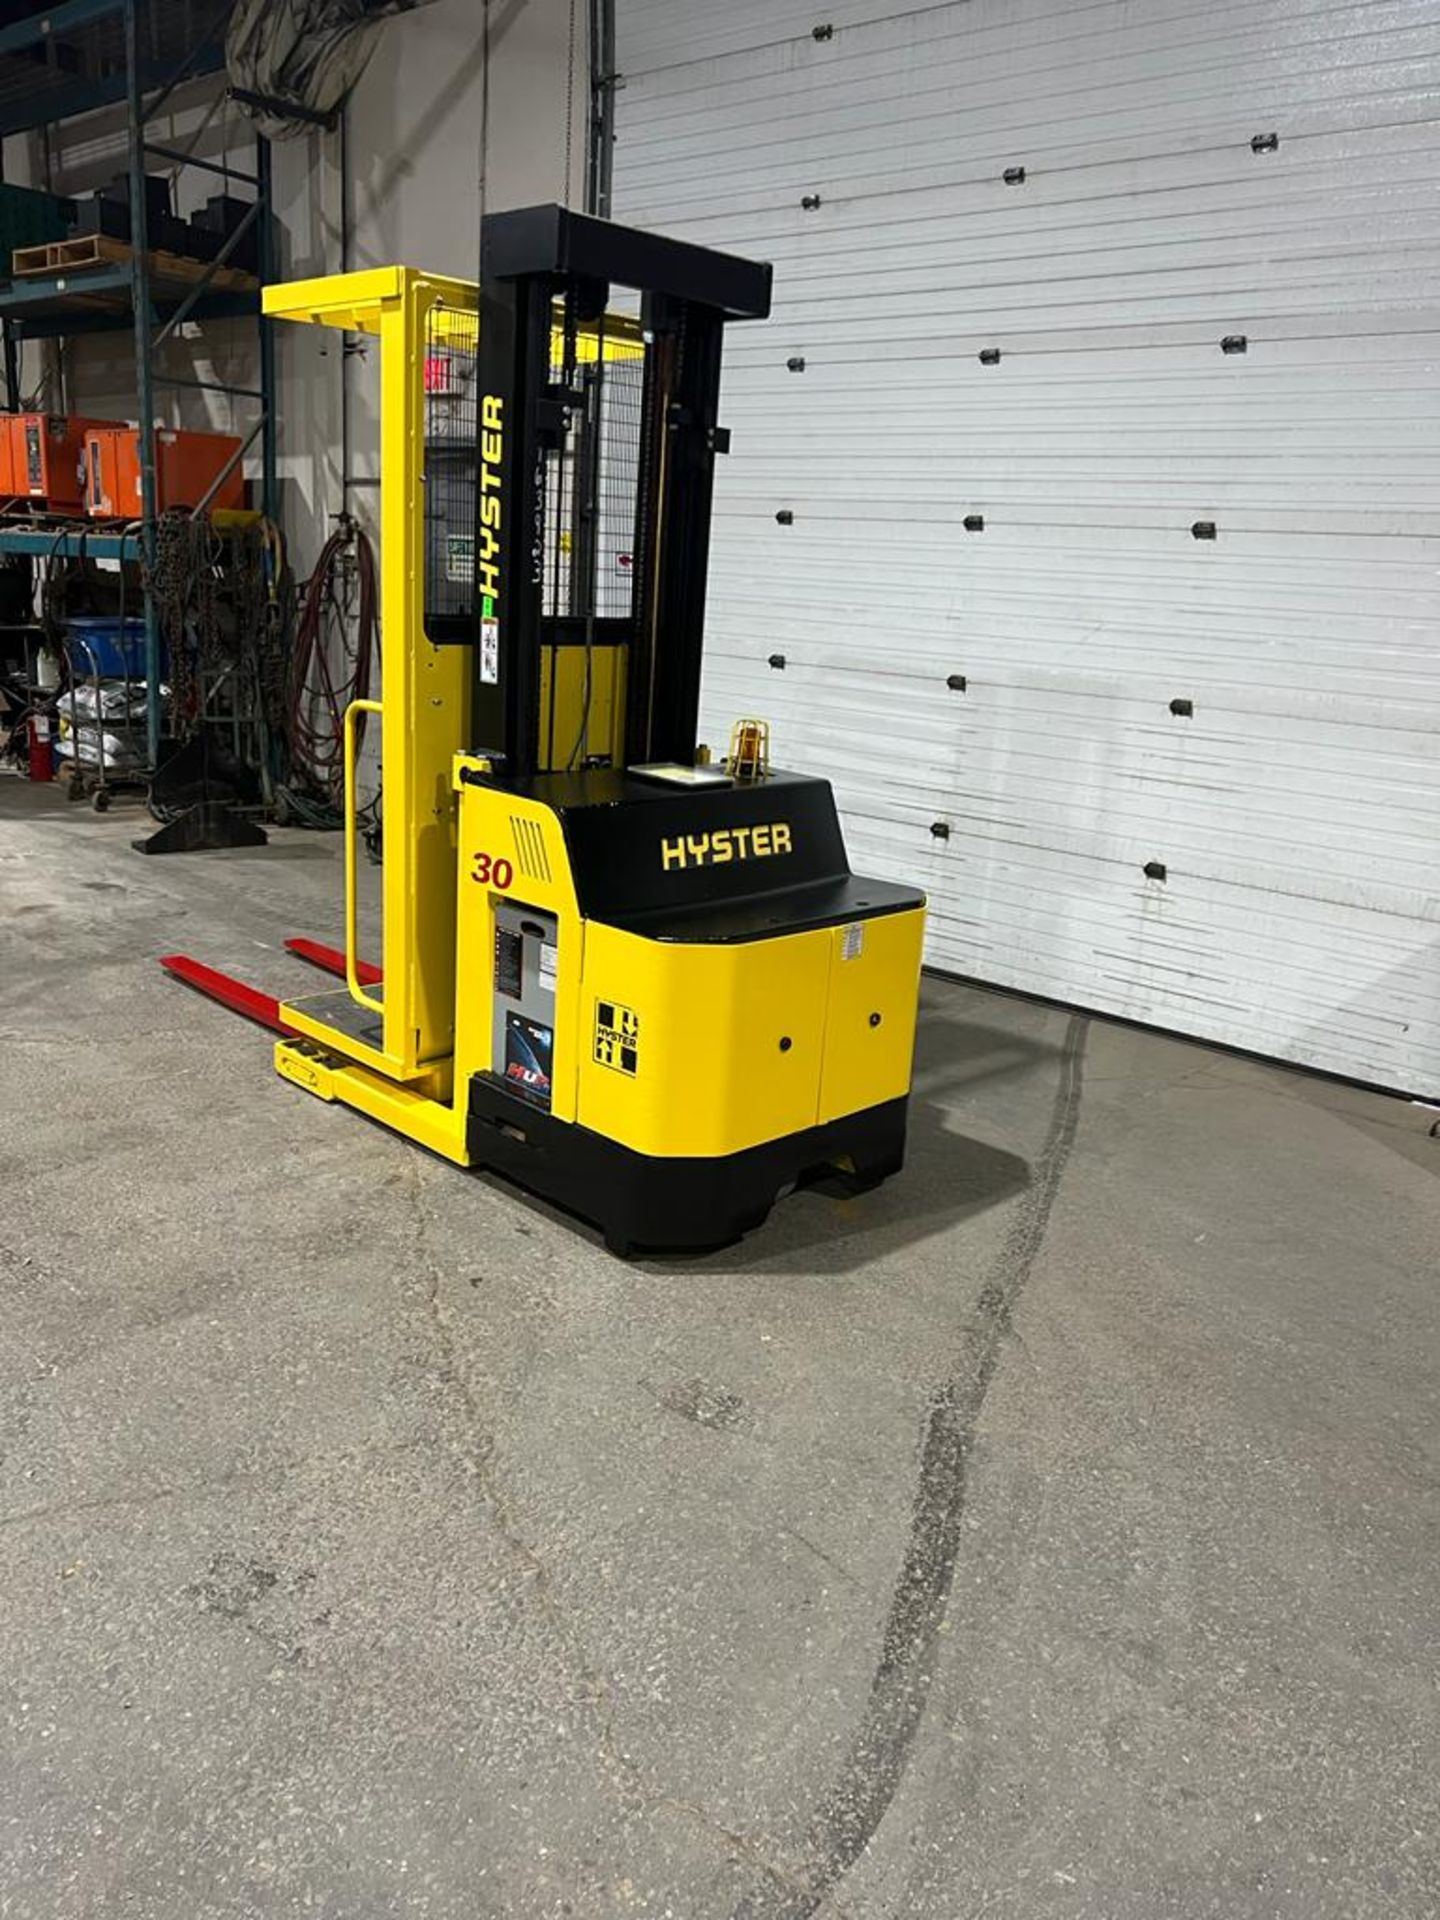 2015 Hyster Order Picker 3000lbs capacity electric Powered Pallet Cart 24V battery - FREE CUSTOMS - Image 3 of 5